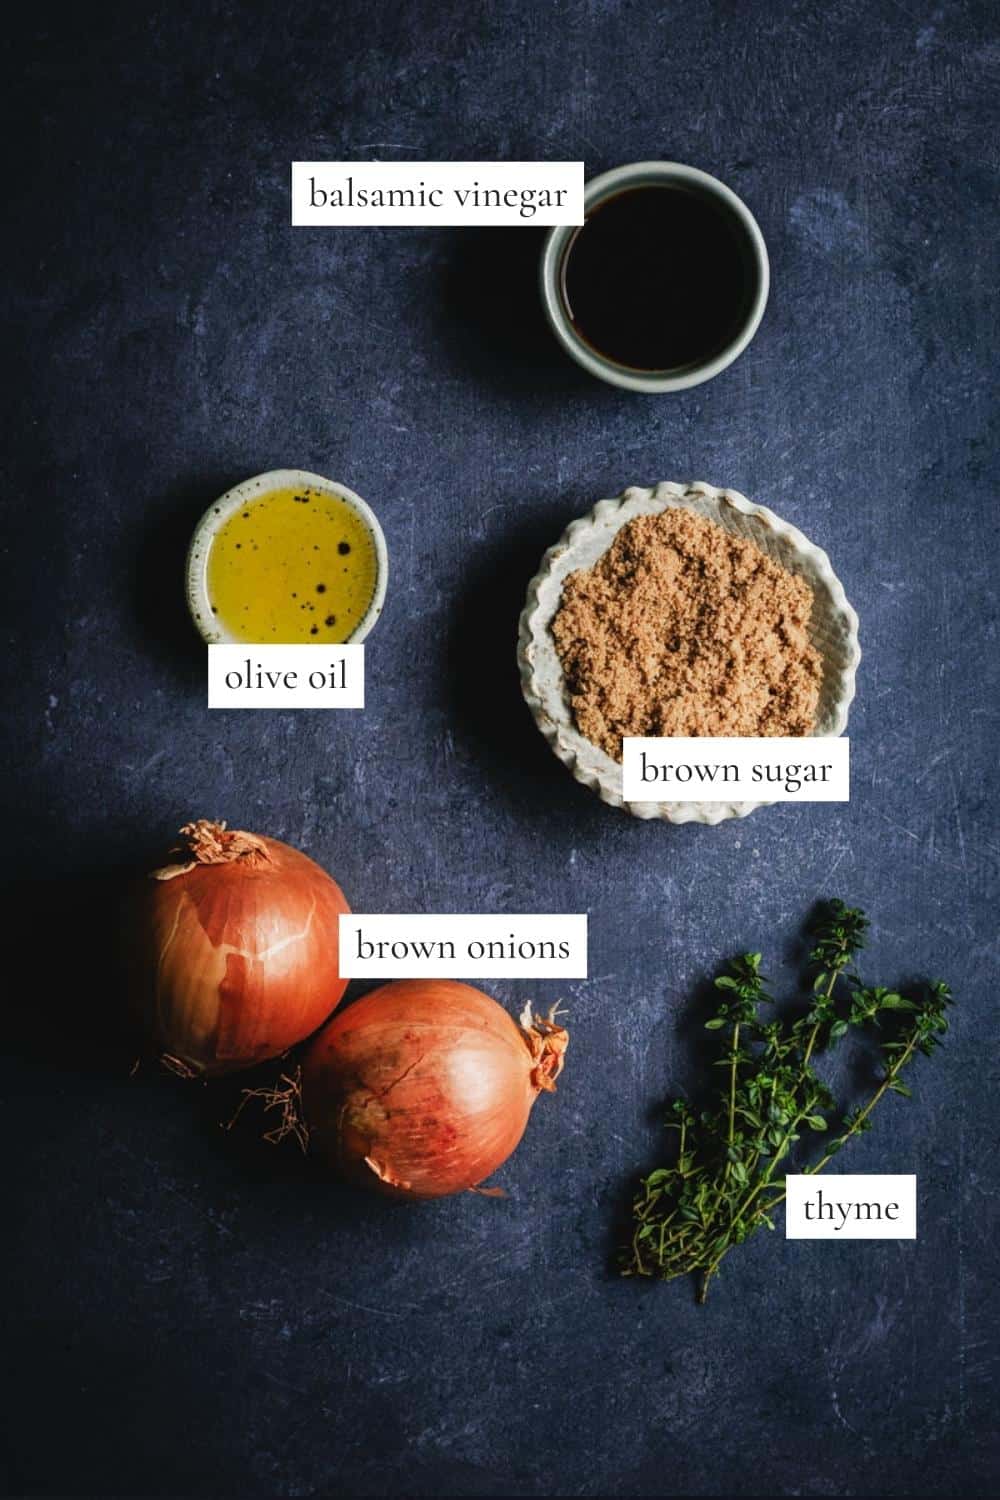 All the ingredients you need to make Caramelized balsamic onion jam.